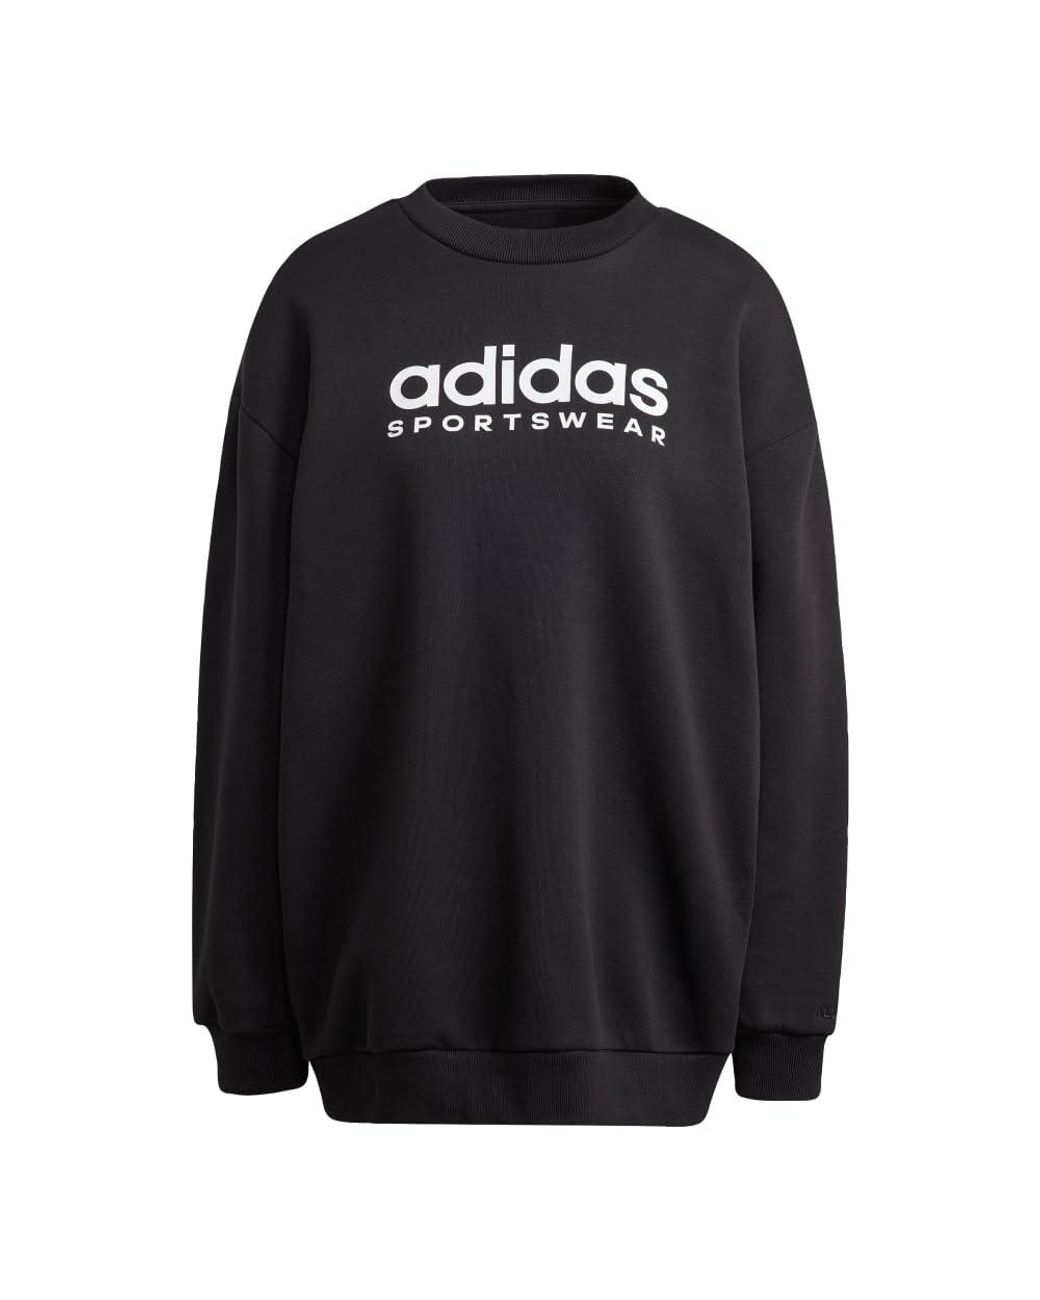 | Lyst Graphics All adidas in Szn Sweater Black